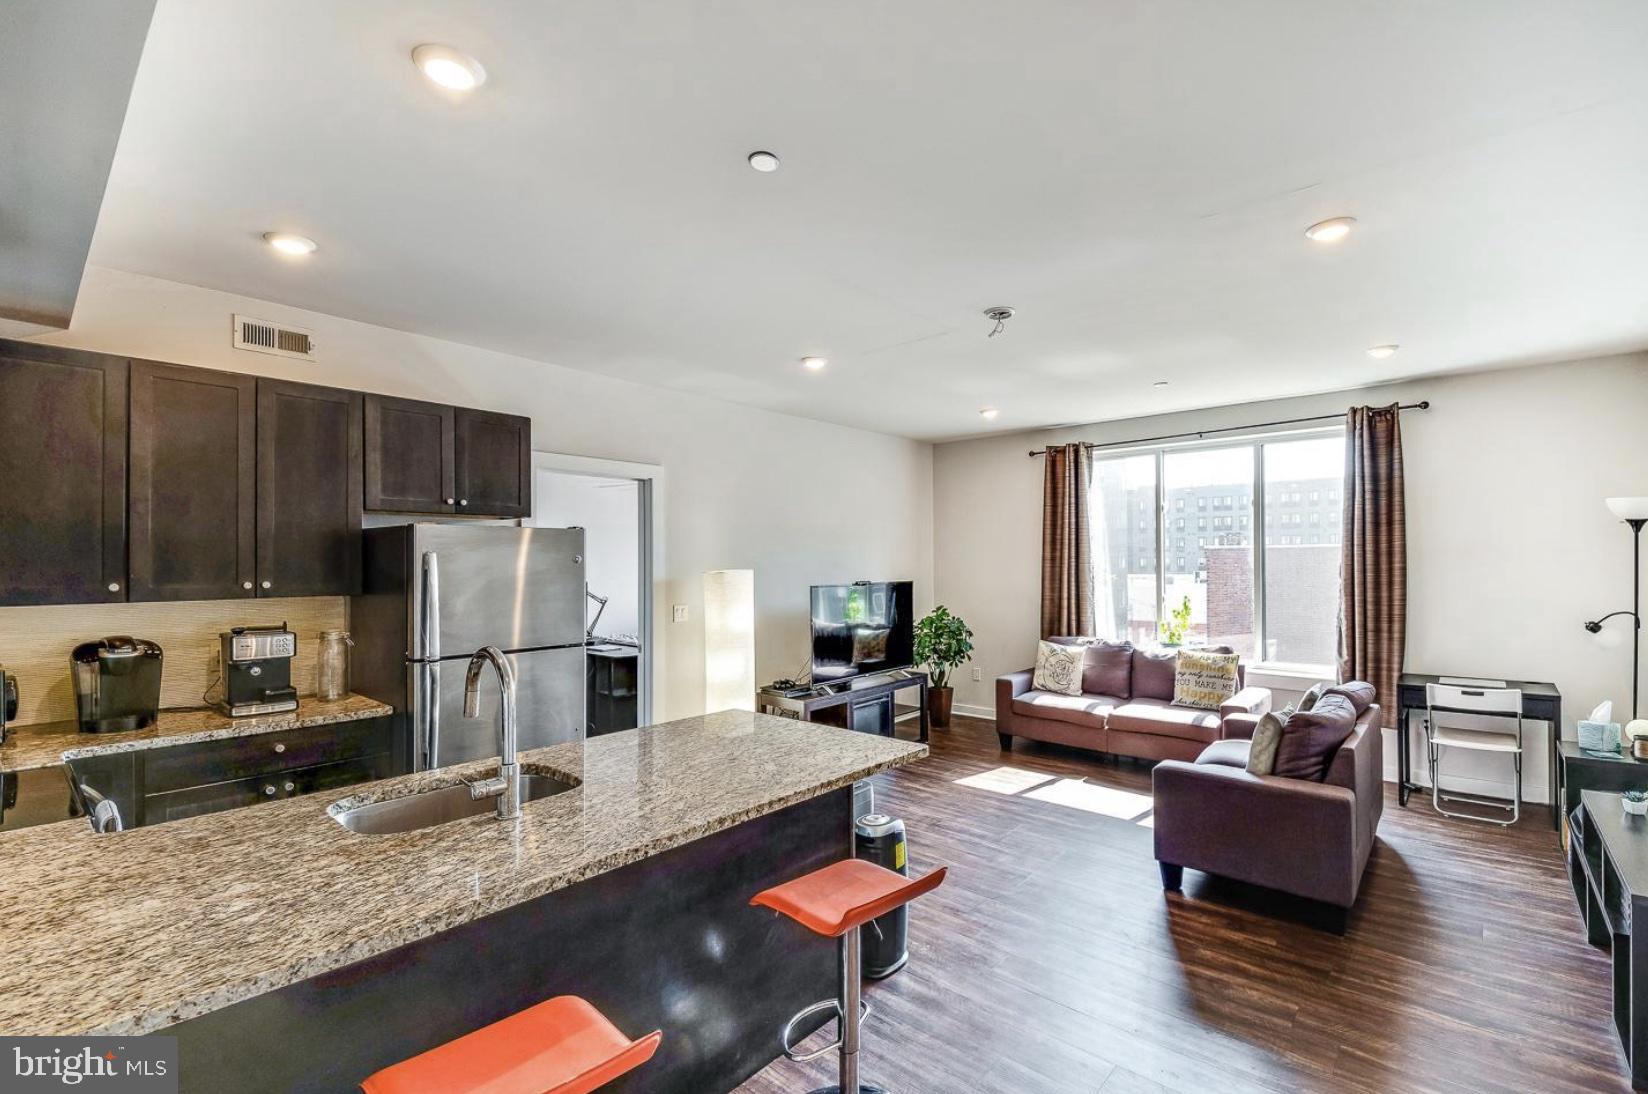 a living room with stainless steel appliances granite countertop a couch wooden floor and a refrigerator